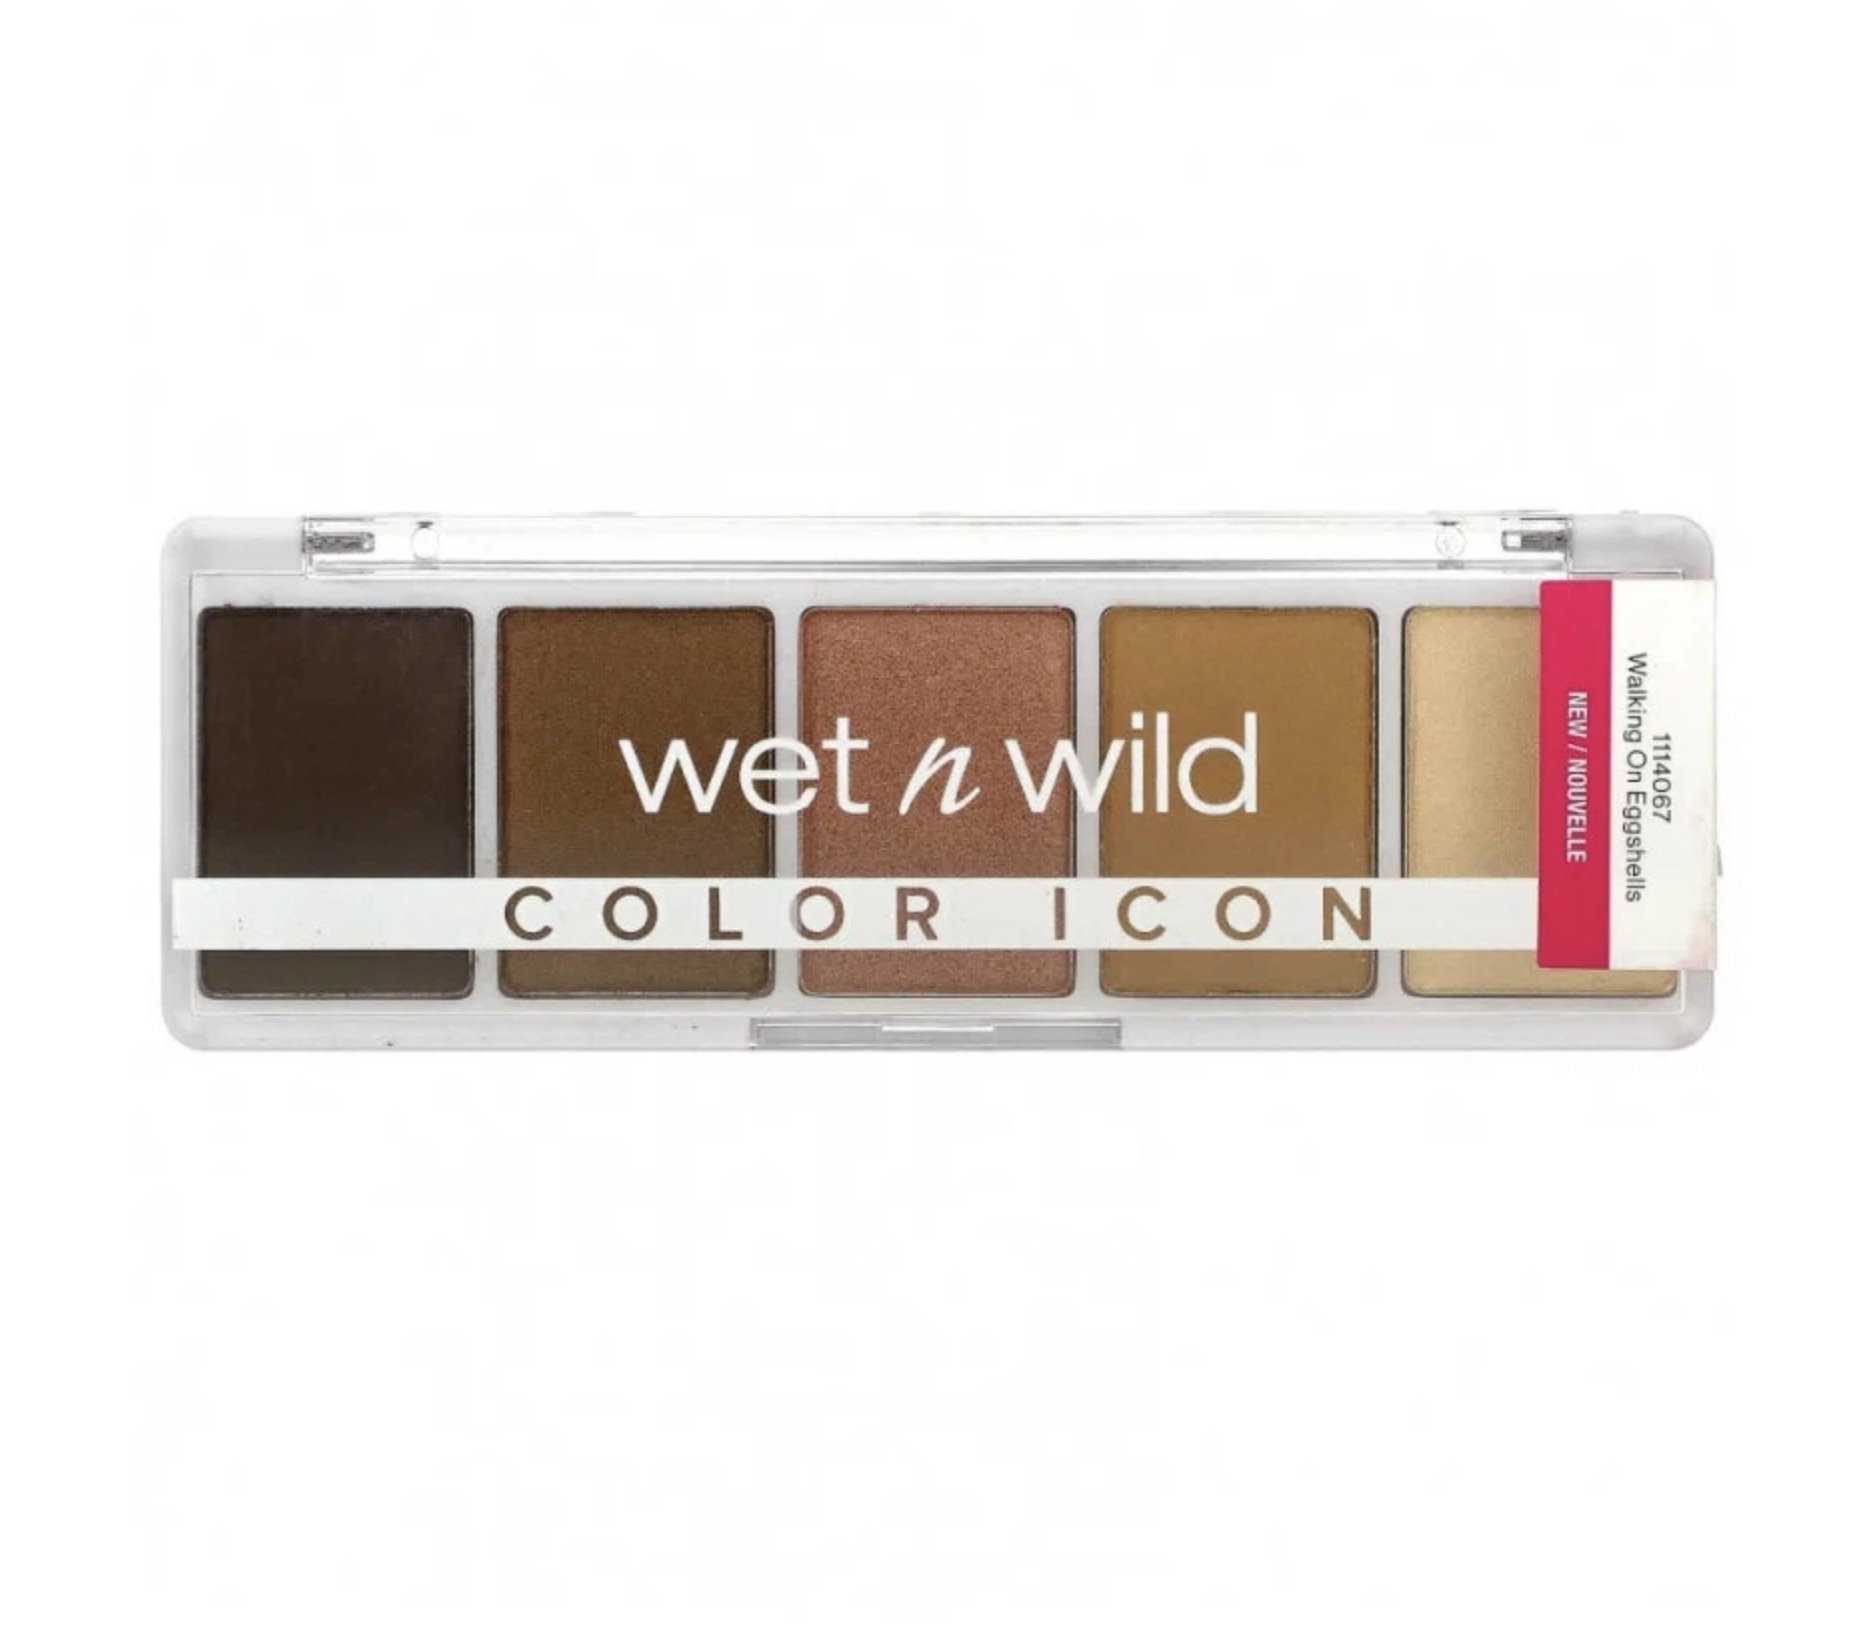     / Wet n Wild -     Color Icon  Walking On Eggshell 6  (5 )